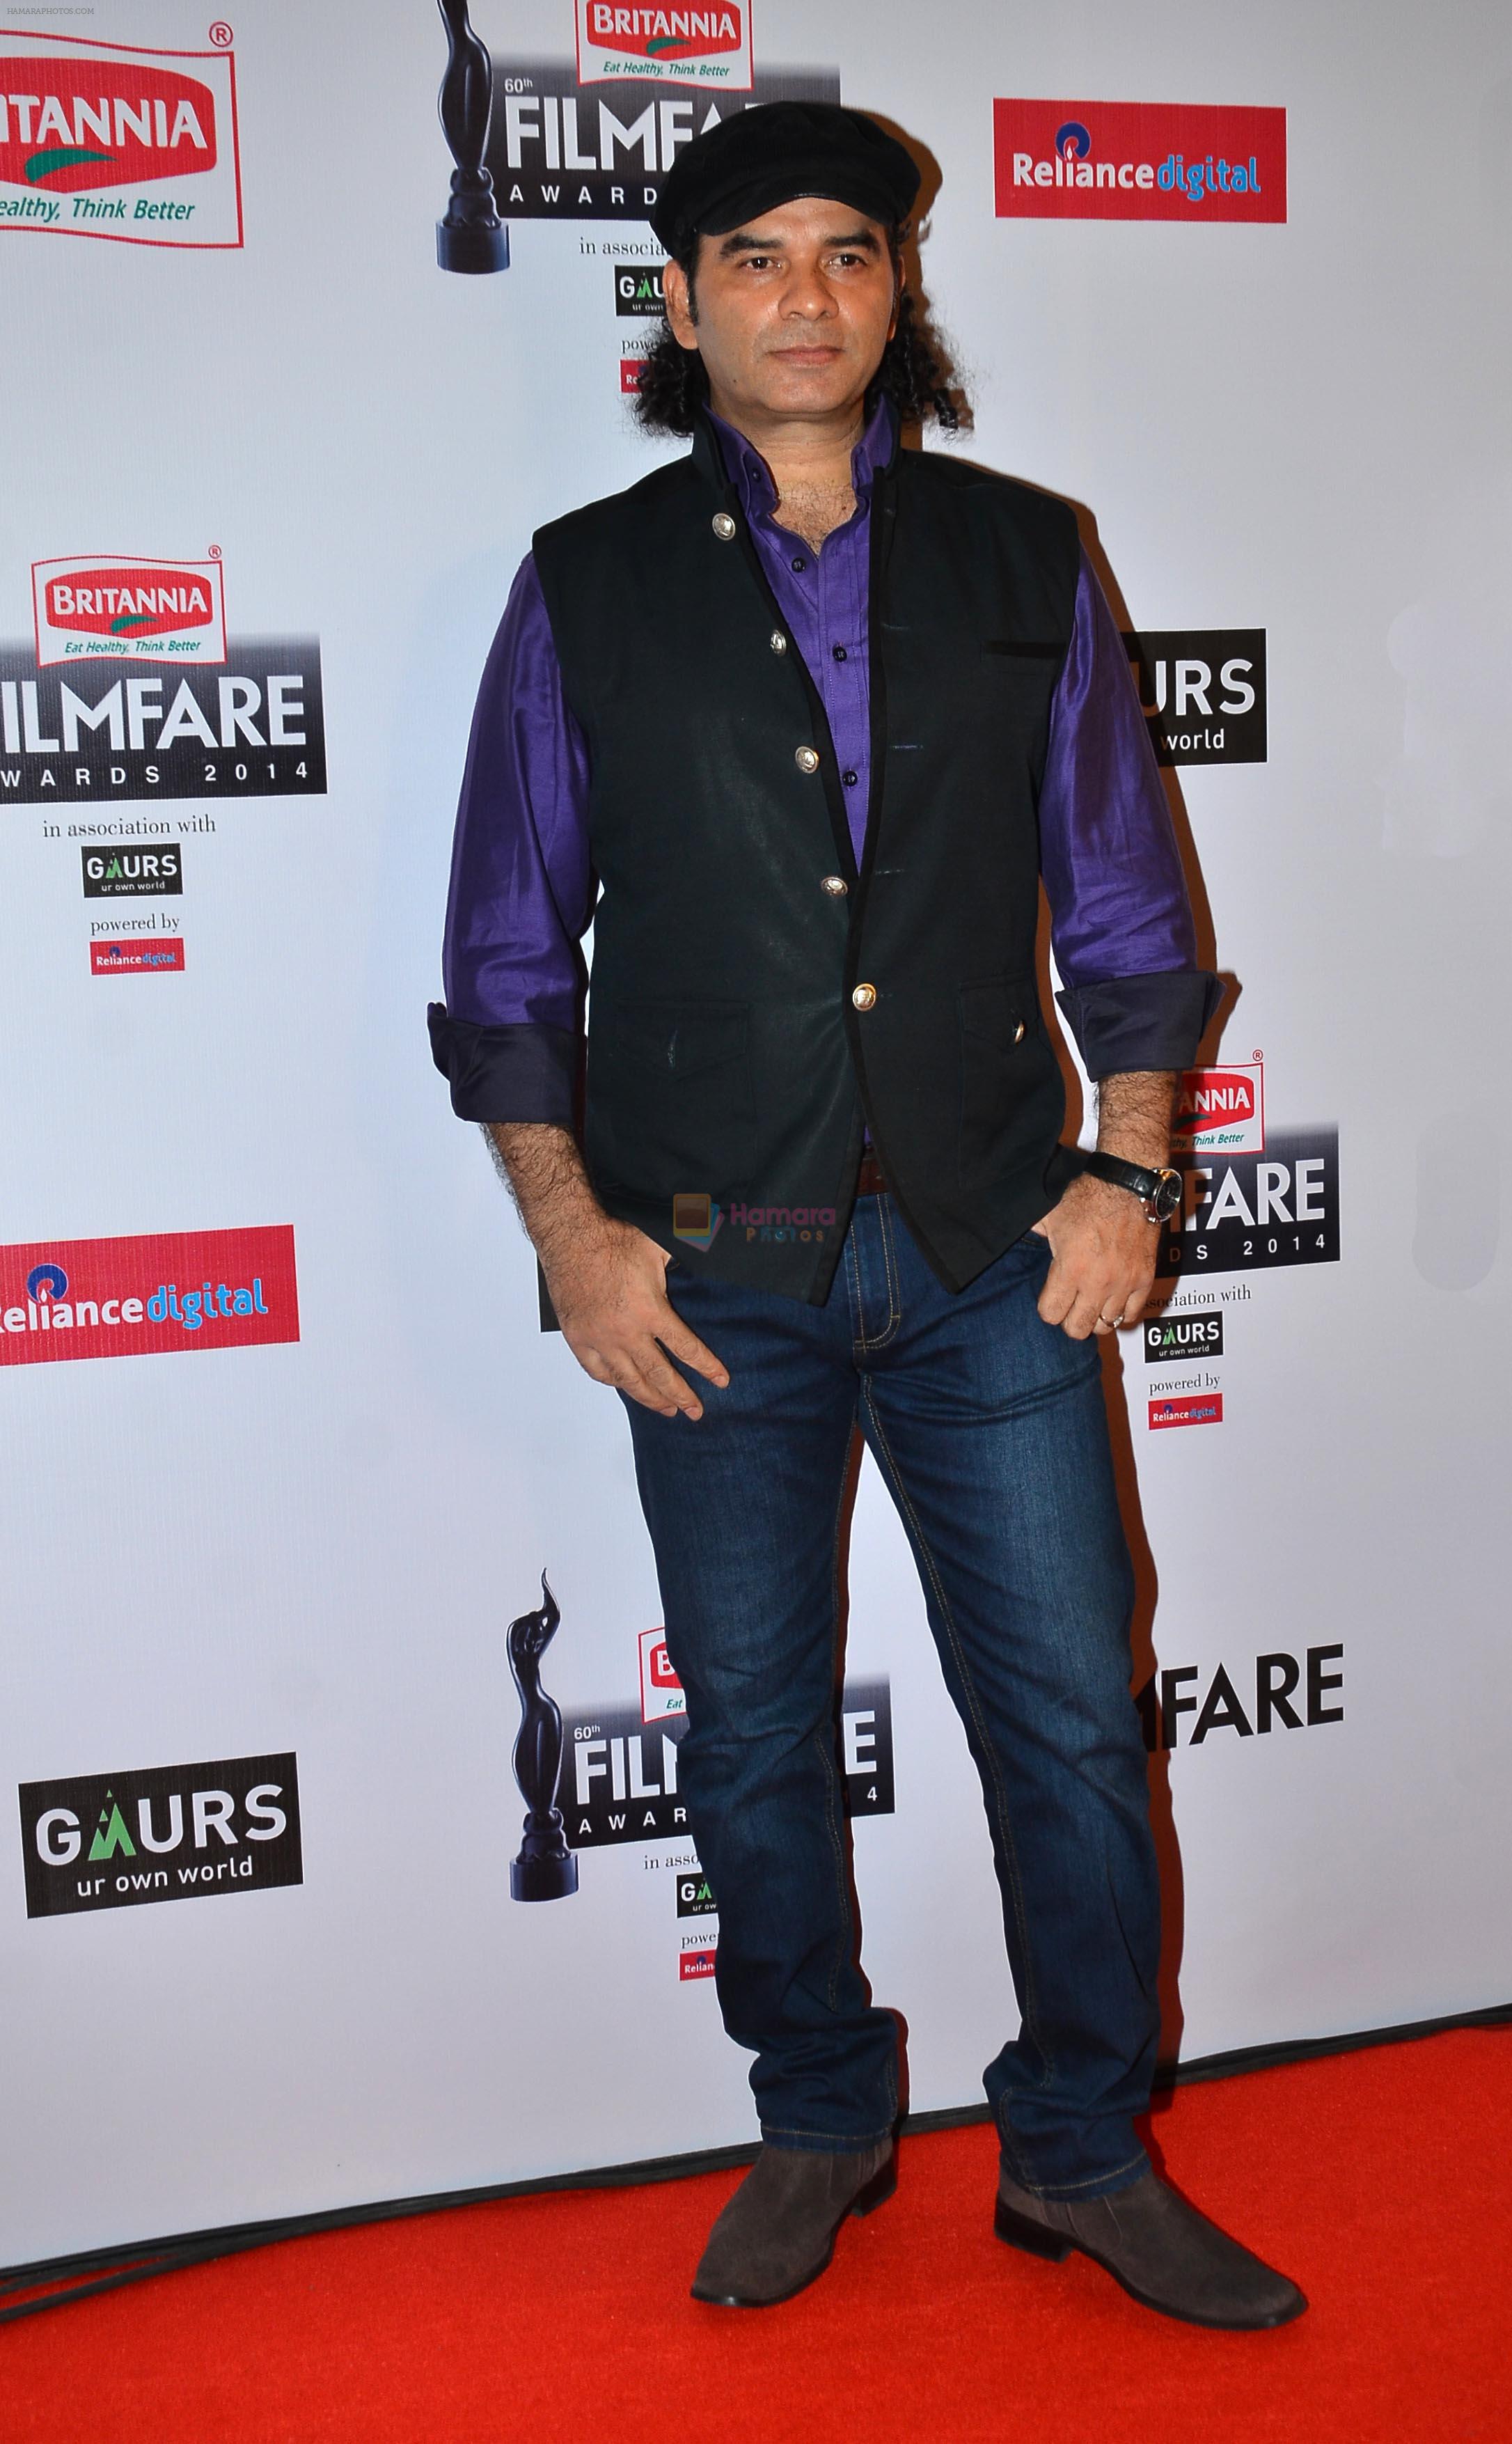 Mohit Chauhan graces the red carpet at the 60th Britannia Filmfare Awards